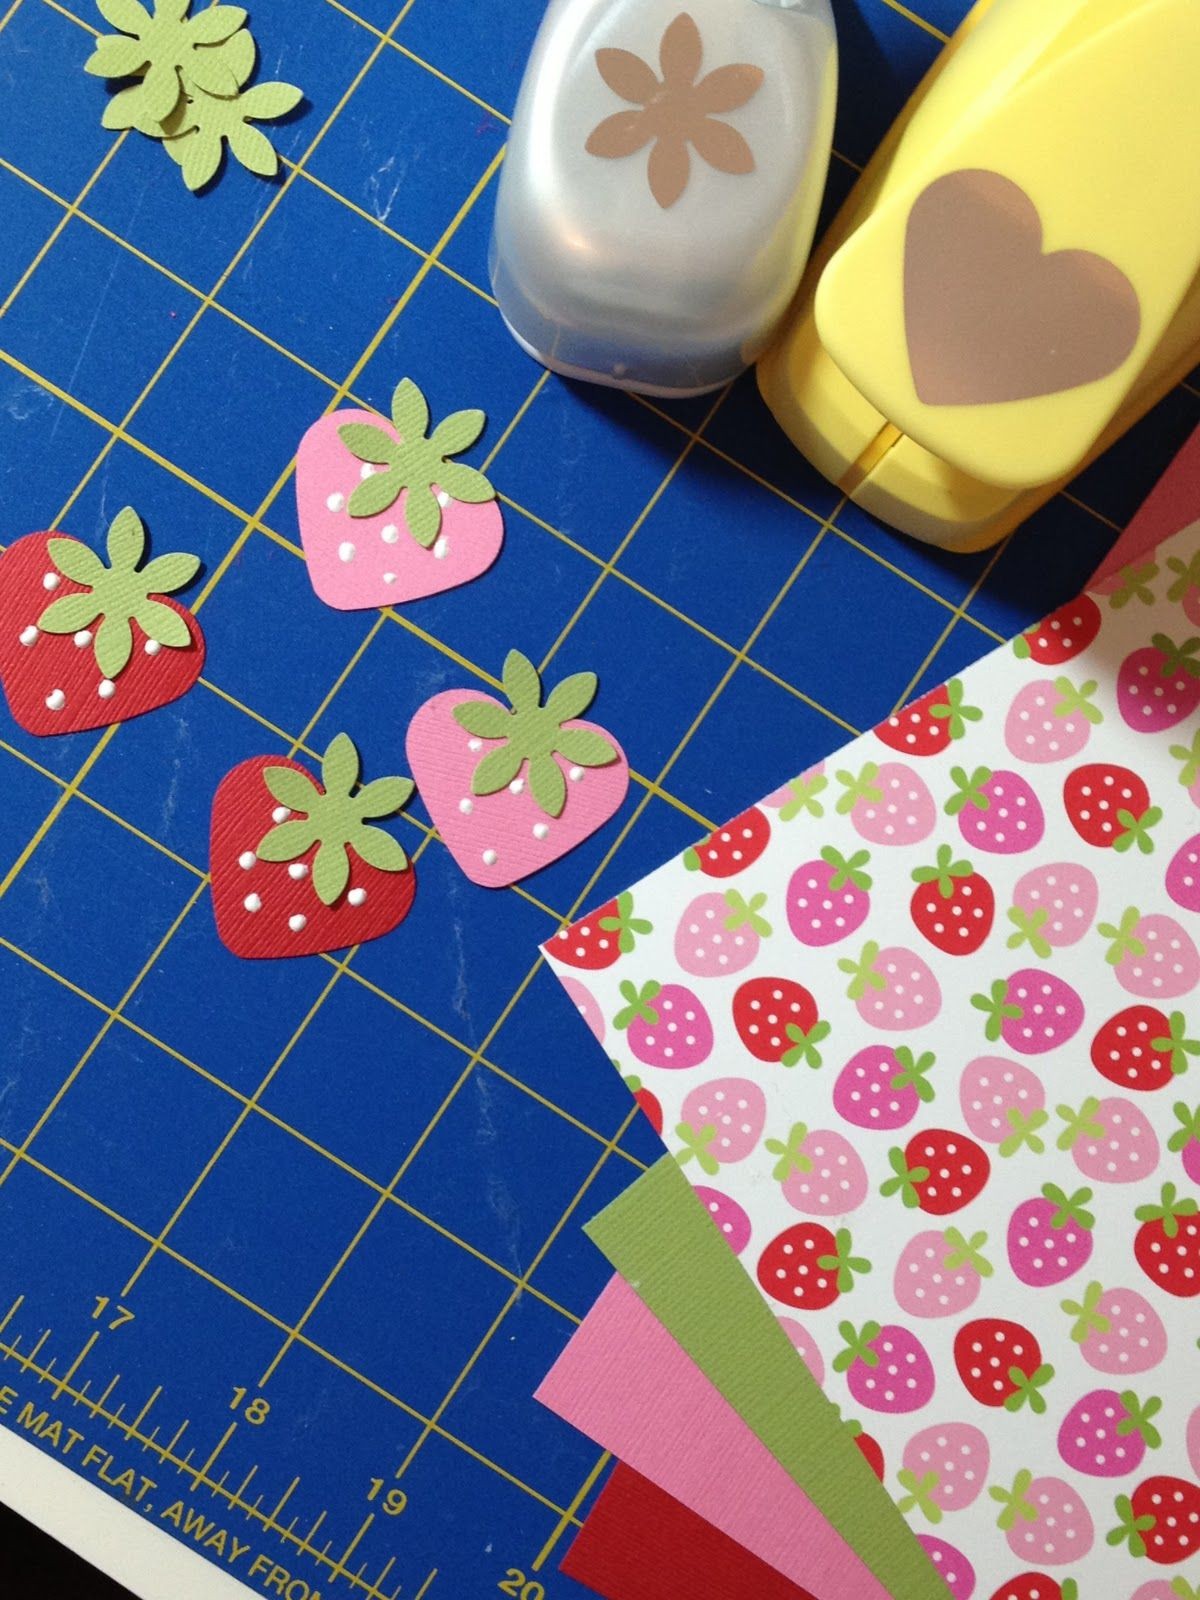 Papercraft Punches Use A Heart Punch and A Flower Punch to Make A Strawberry Add some